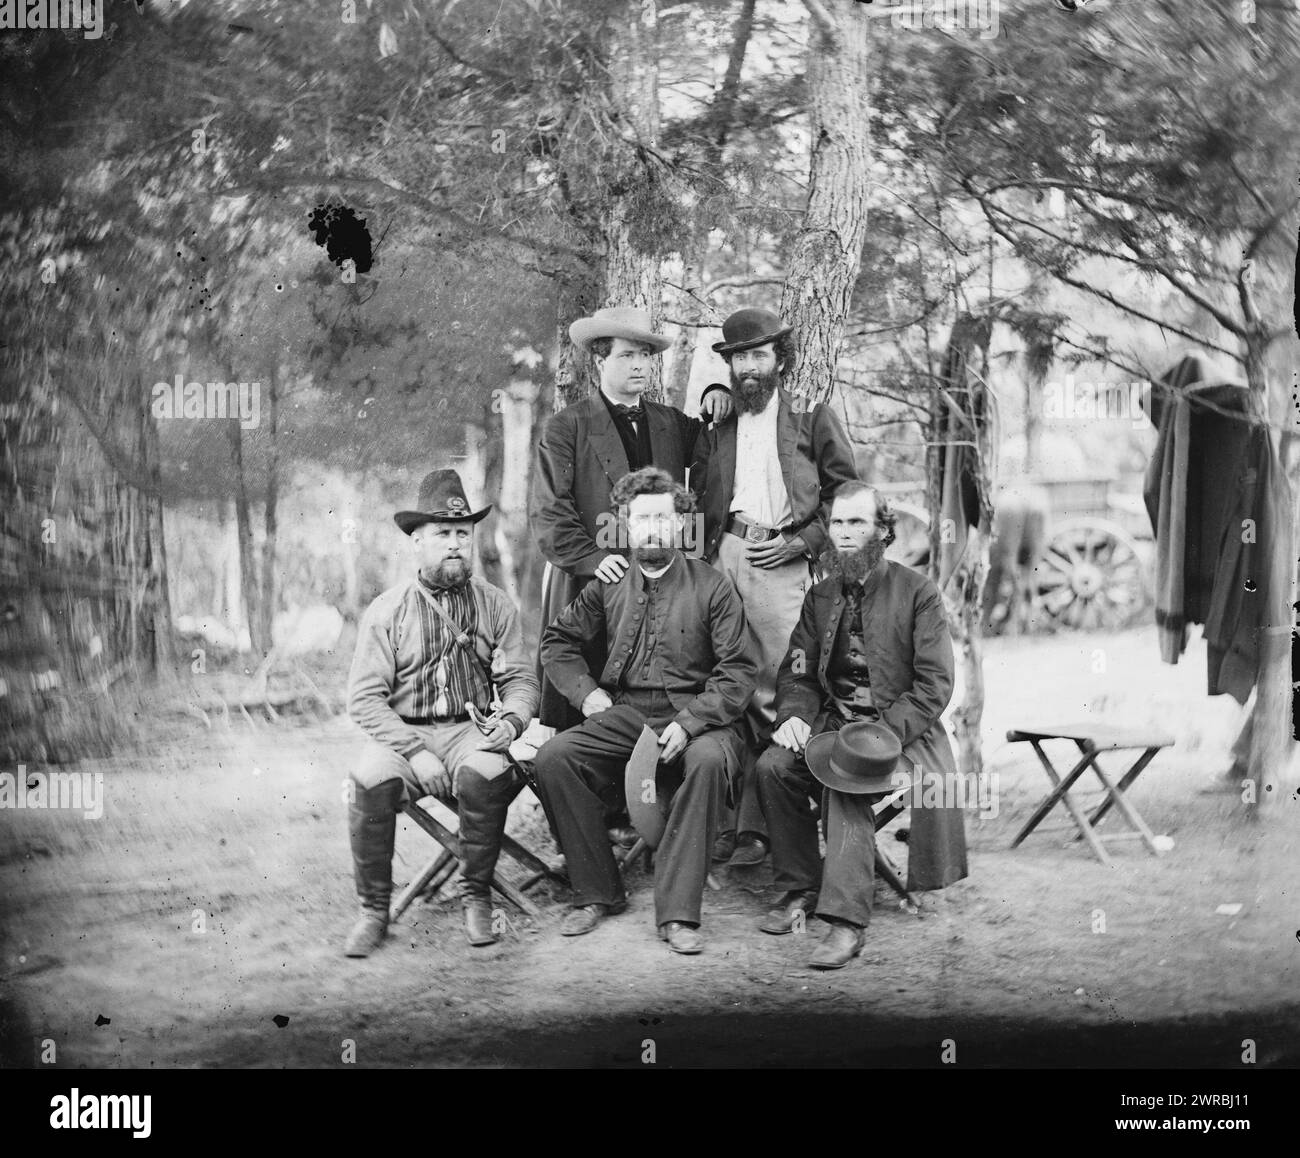 Harrison's Landing, Va. Group of the Irish Brigade, Photo shows: (back row) Patrick Dillon, unidentified; and (front row, left to right) unidentified, James Dillon, and William Corby. The identified men are priests of the Congregation of the Holy Cross, University of Notre Dame., Photograph from the main eastern theater of war, the Peninsular Campaign, May-August 1862., Gardner, Alexander, 1821-1882, photographer, 1862 July., United States, History, Civil War, 1861-1865, Military personnel, Glass negatives, 1860-1870, Stereographs, 1860-1870, 1 negative: glass, stereograph, wet collodion Stock Photo